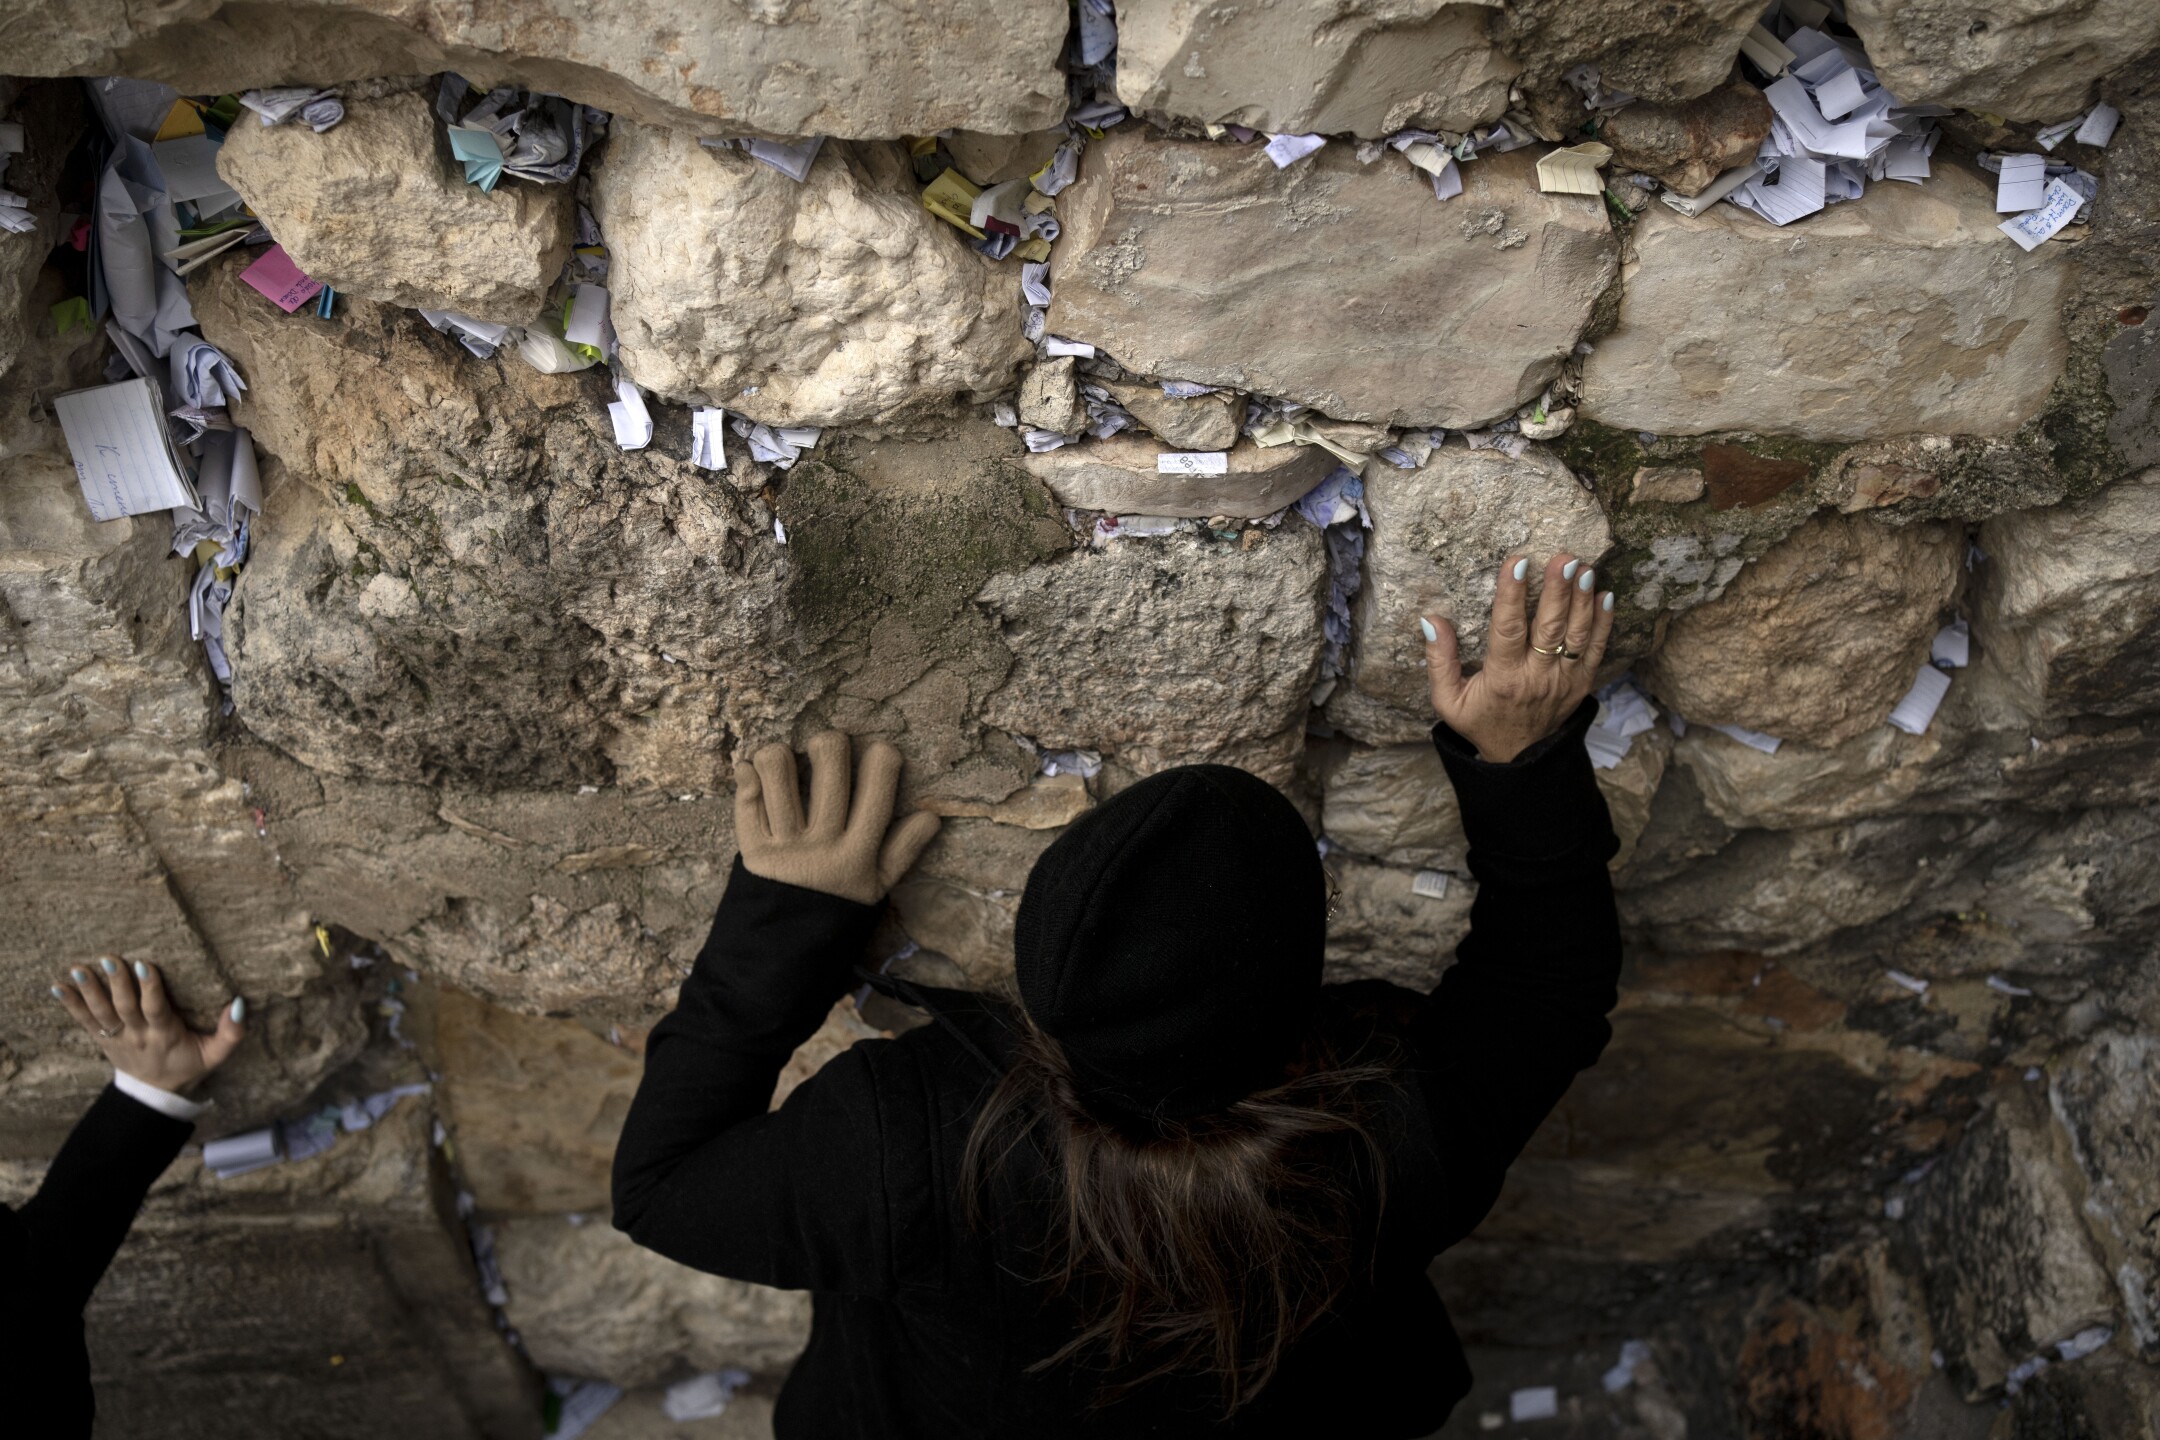 Worshippers visit the women's section of the Western Wall, the holiest site where Jews can pray, in the Old City of Jerusalem, on Feb. 9, 2023. (AP Photo/Maya Alleruzzo)